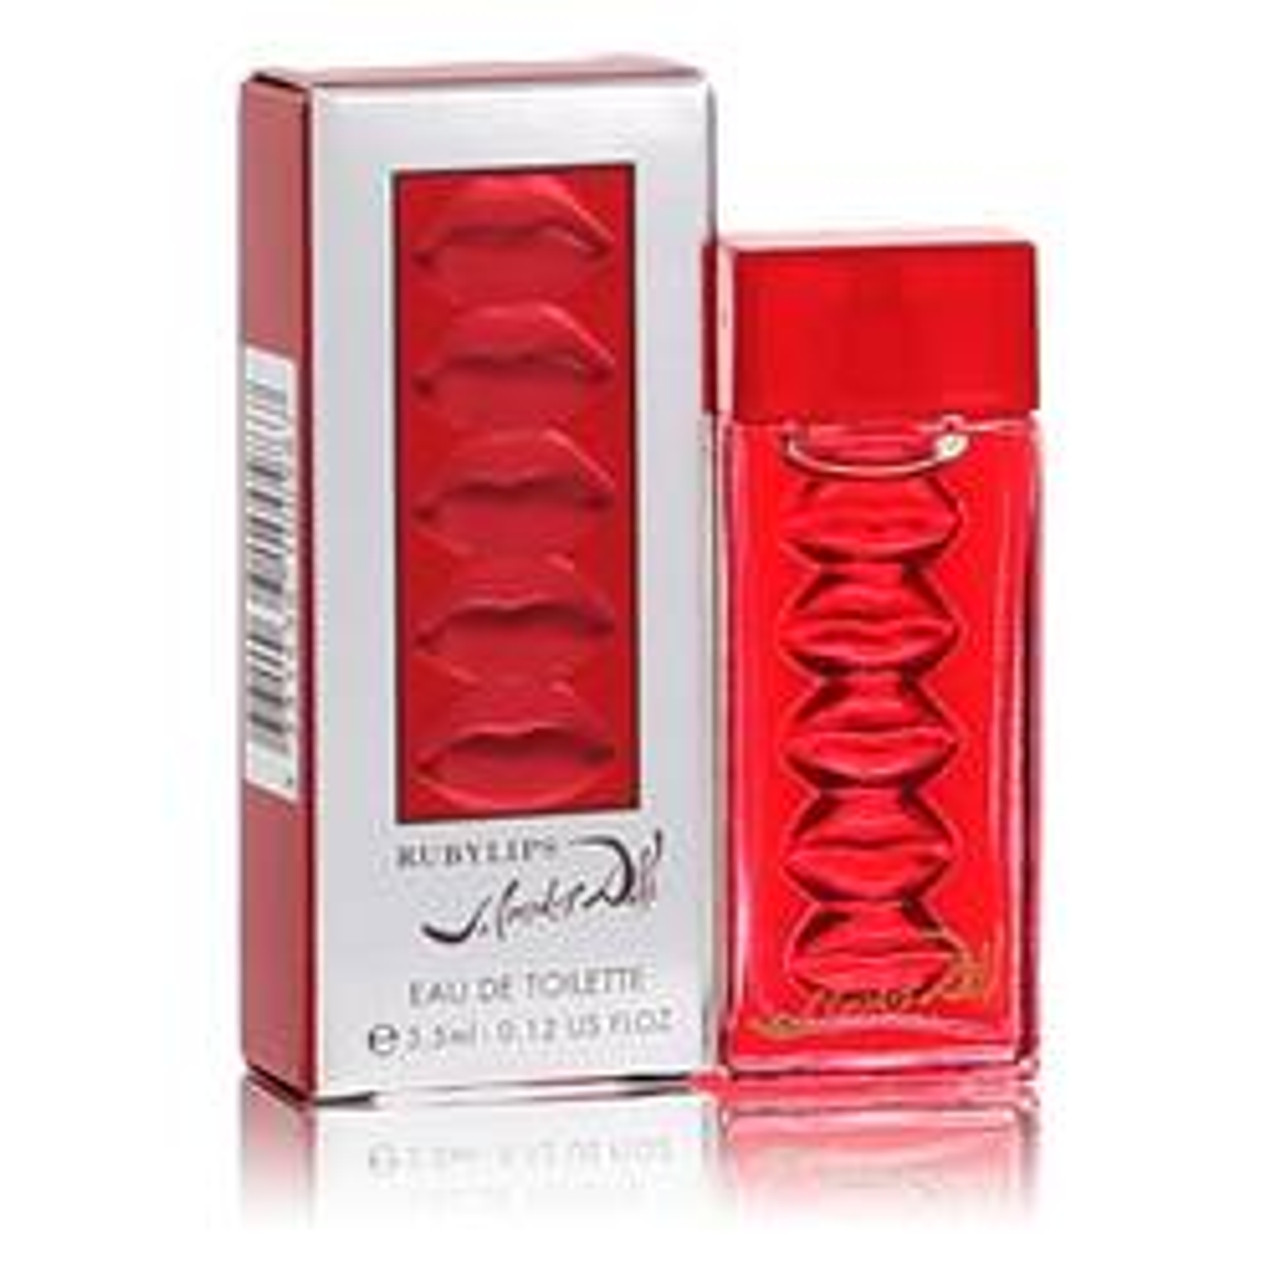 Ruby Lips Perfume By Salvador Dali Mini EDT 0.12 oz for Women - [From 19.00 - Choose pk Qty ] - *Ships from Miami